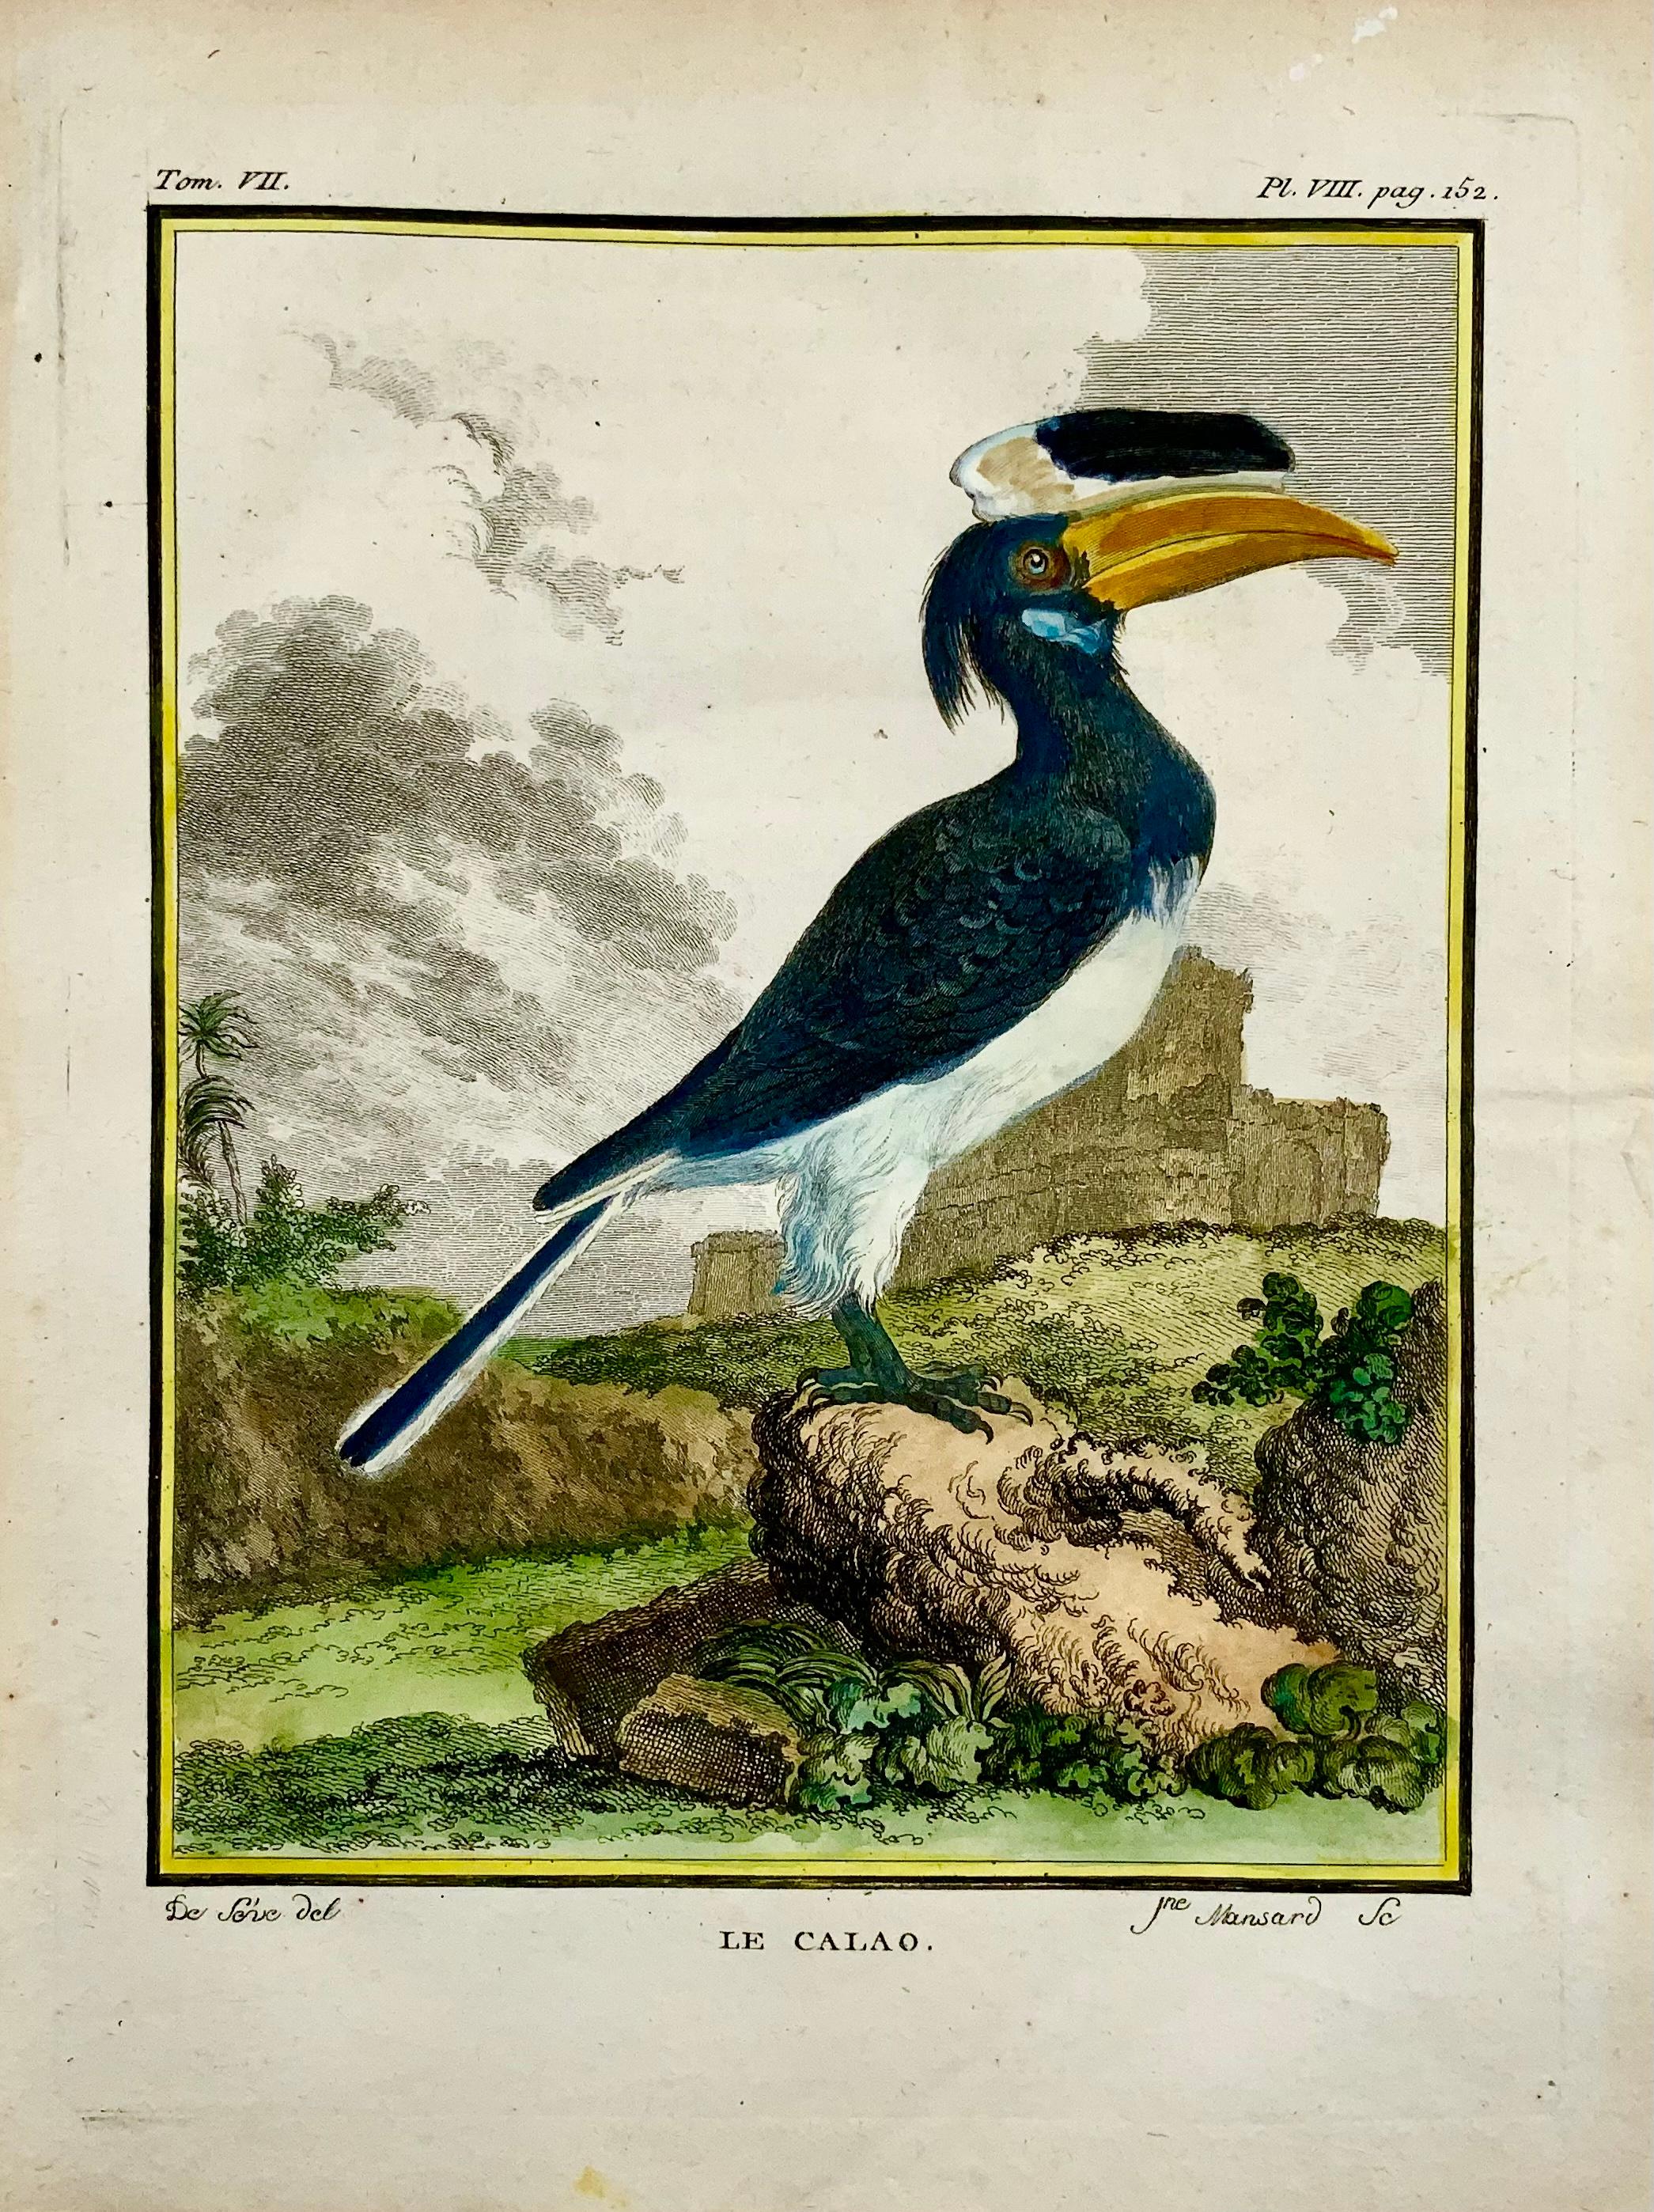 Engraving on hand laid (verge) paper. 

Issued for the famed First Edition in quarto of the “Histoire naturelle des oiseaux.”, by Georges-Louis Leclerc, Comte de Buffon, ed. published in Paris ca 1775. 

Made by ‘Mansard’ after ‘Jacques de